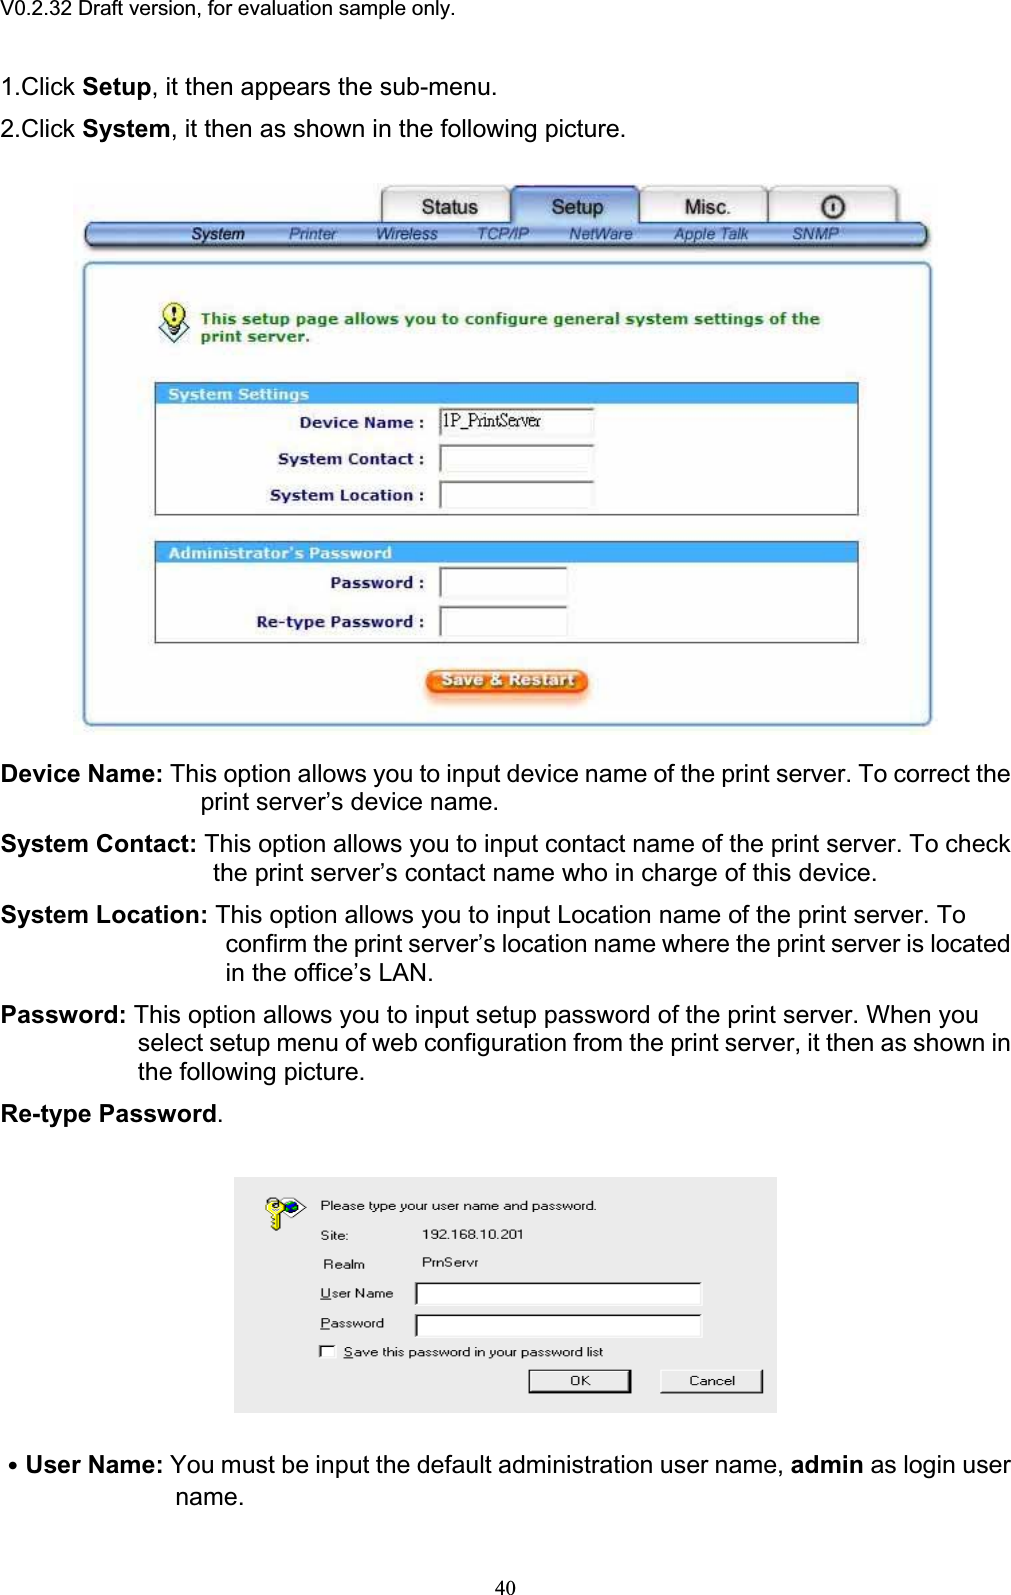 V0.2.32 Draft version, for evaluation sample only.1.Click Setup, it then appears the sub-menu. 2.Click System, it then as shown in the following picture. Device Name: This option allows you to input device name of the print server. To correct the print server’s device name. System Contact: This option allows you to input contact name of the print server. To checkthe print server’s contact name who in charge of this device. System Location: This option allows you to input Location name of the print server. To confirm the print server’s location name where the print server is located in the office’s LAN. Password: This option allows you to input setup password of the print server. When you select setup menu of web configuration from the print server, it then as shown in the following picture. Re-type Password.ԦUser Name: You must be input the default administration user name, admin as login user name.40